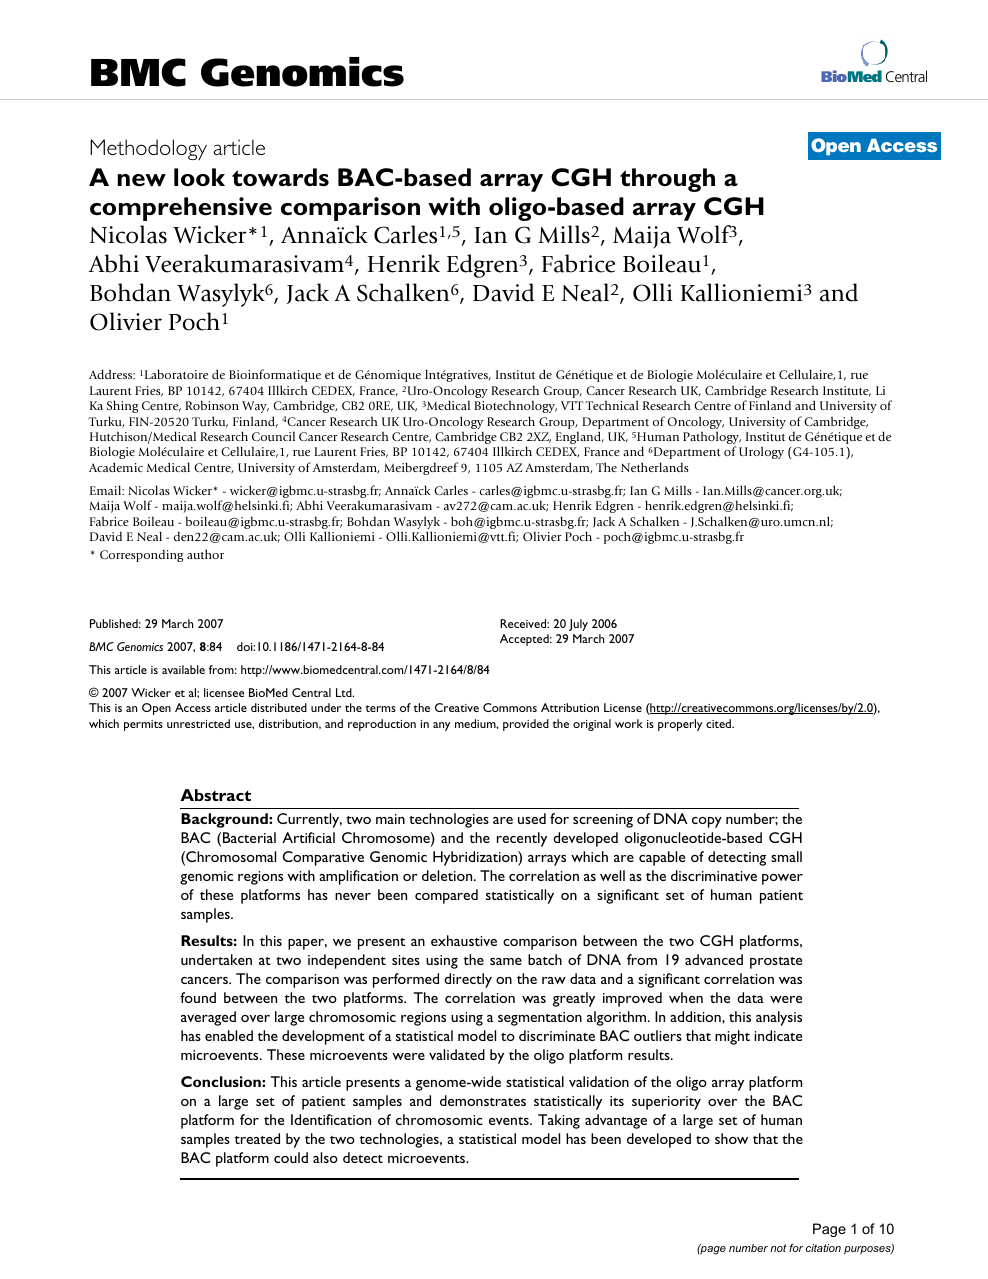 A New Look Towards Bac Based Array Cgh Through A Comprehensive Comparison With Oligo Based Array Cgh Topic Of Research Paper In Clinical Medicine Download Scholarly Article Pdf And Read For Free On